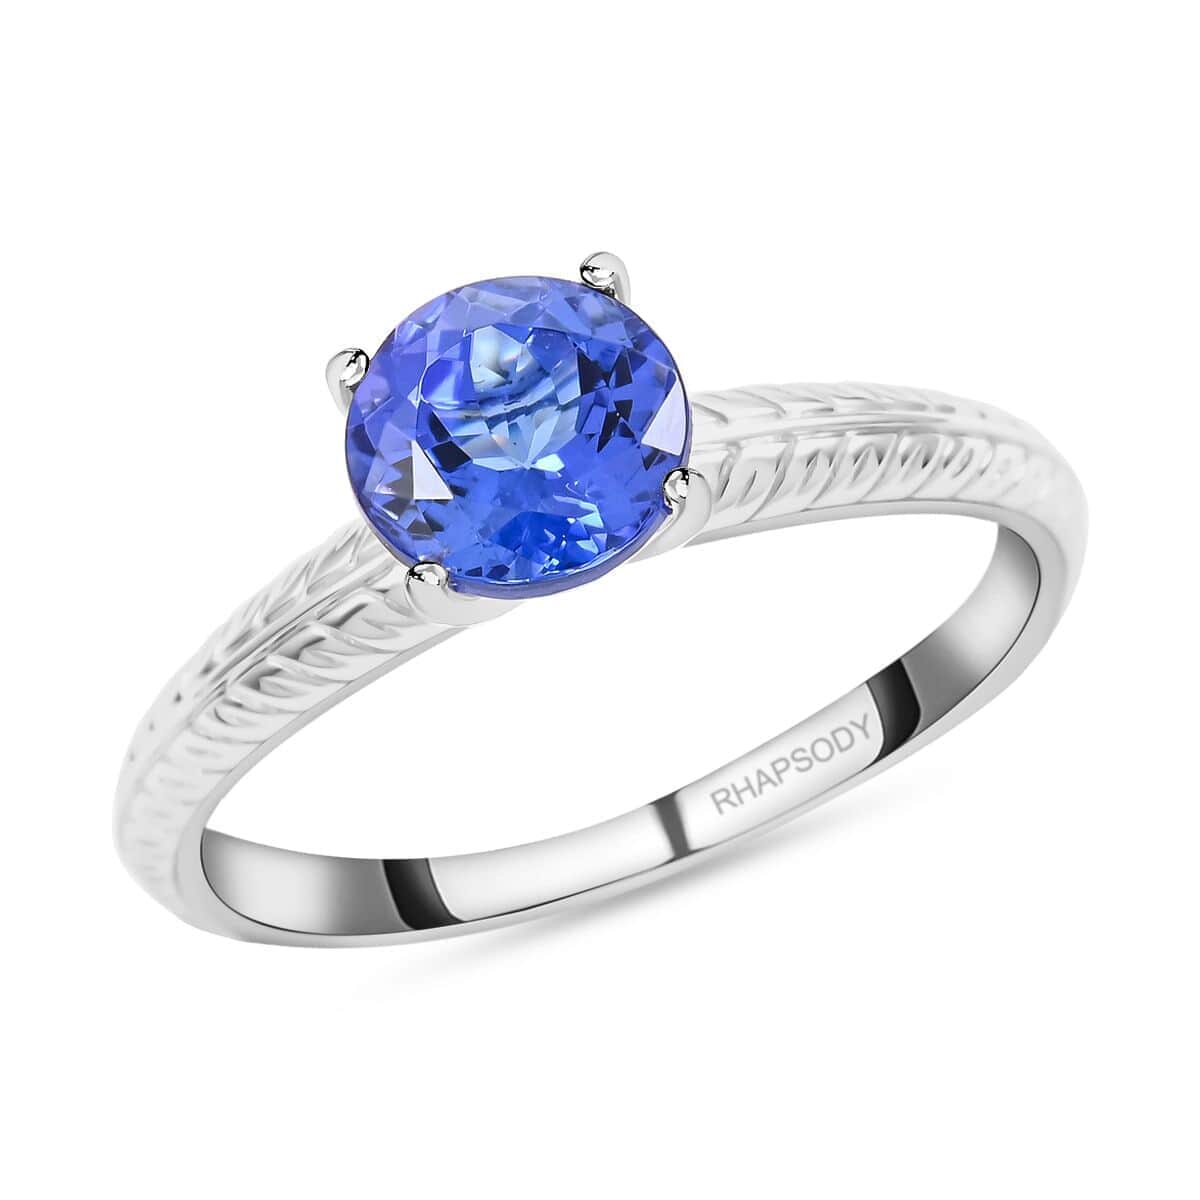 Certified & Appraised Rhapsody 950 Platinum AAAA Tanzanite Solitaire Ring (Size 10.0) 4.65 Grams 1.50 ctw image number 0